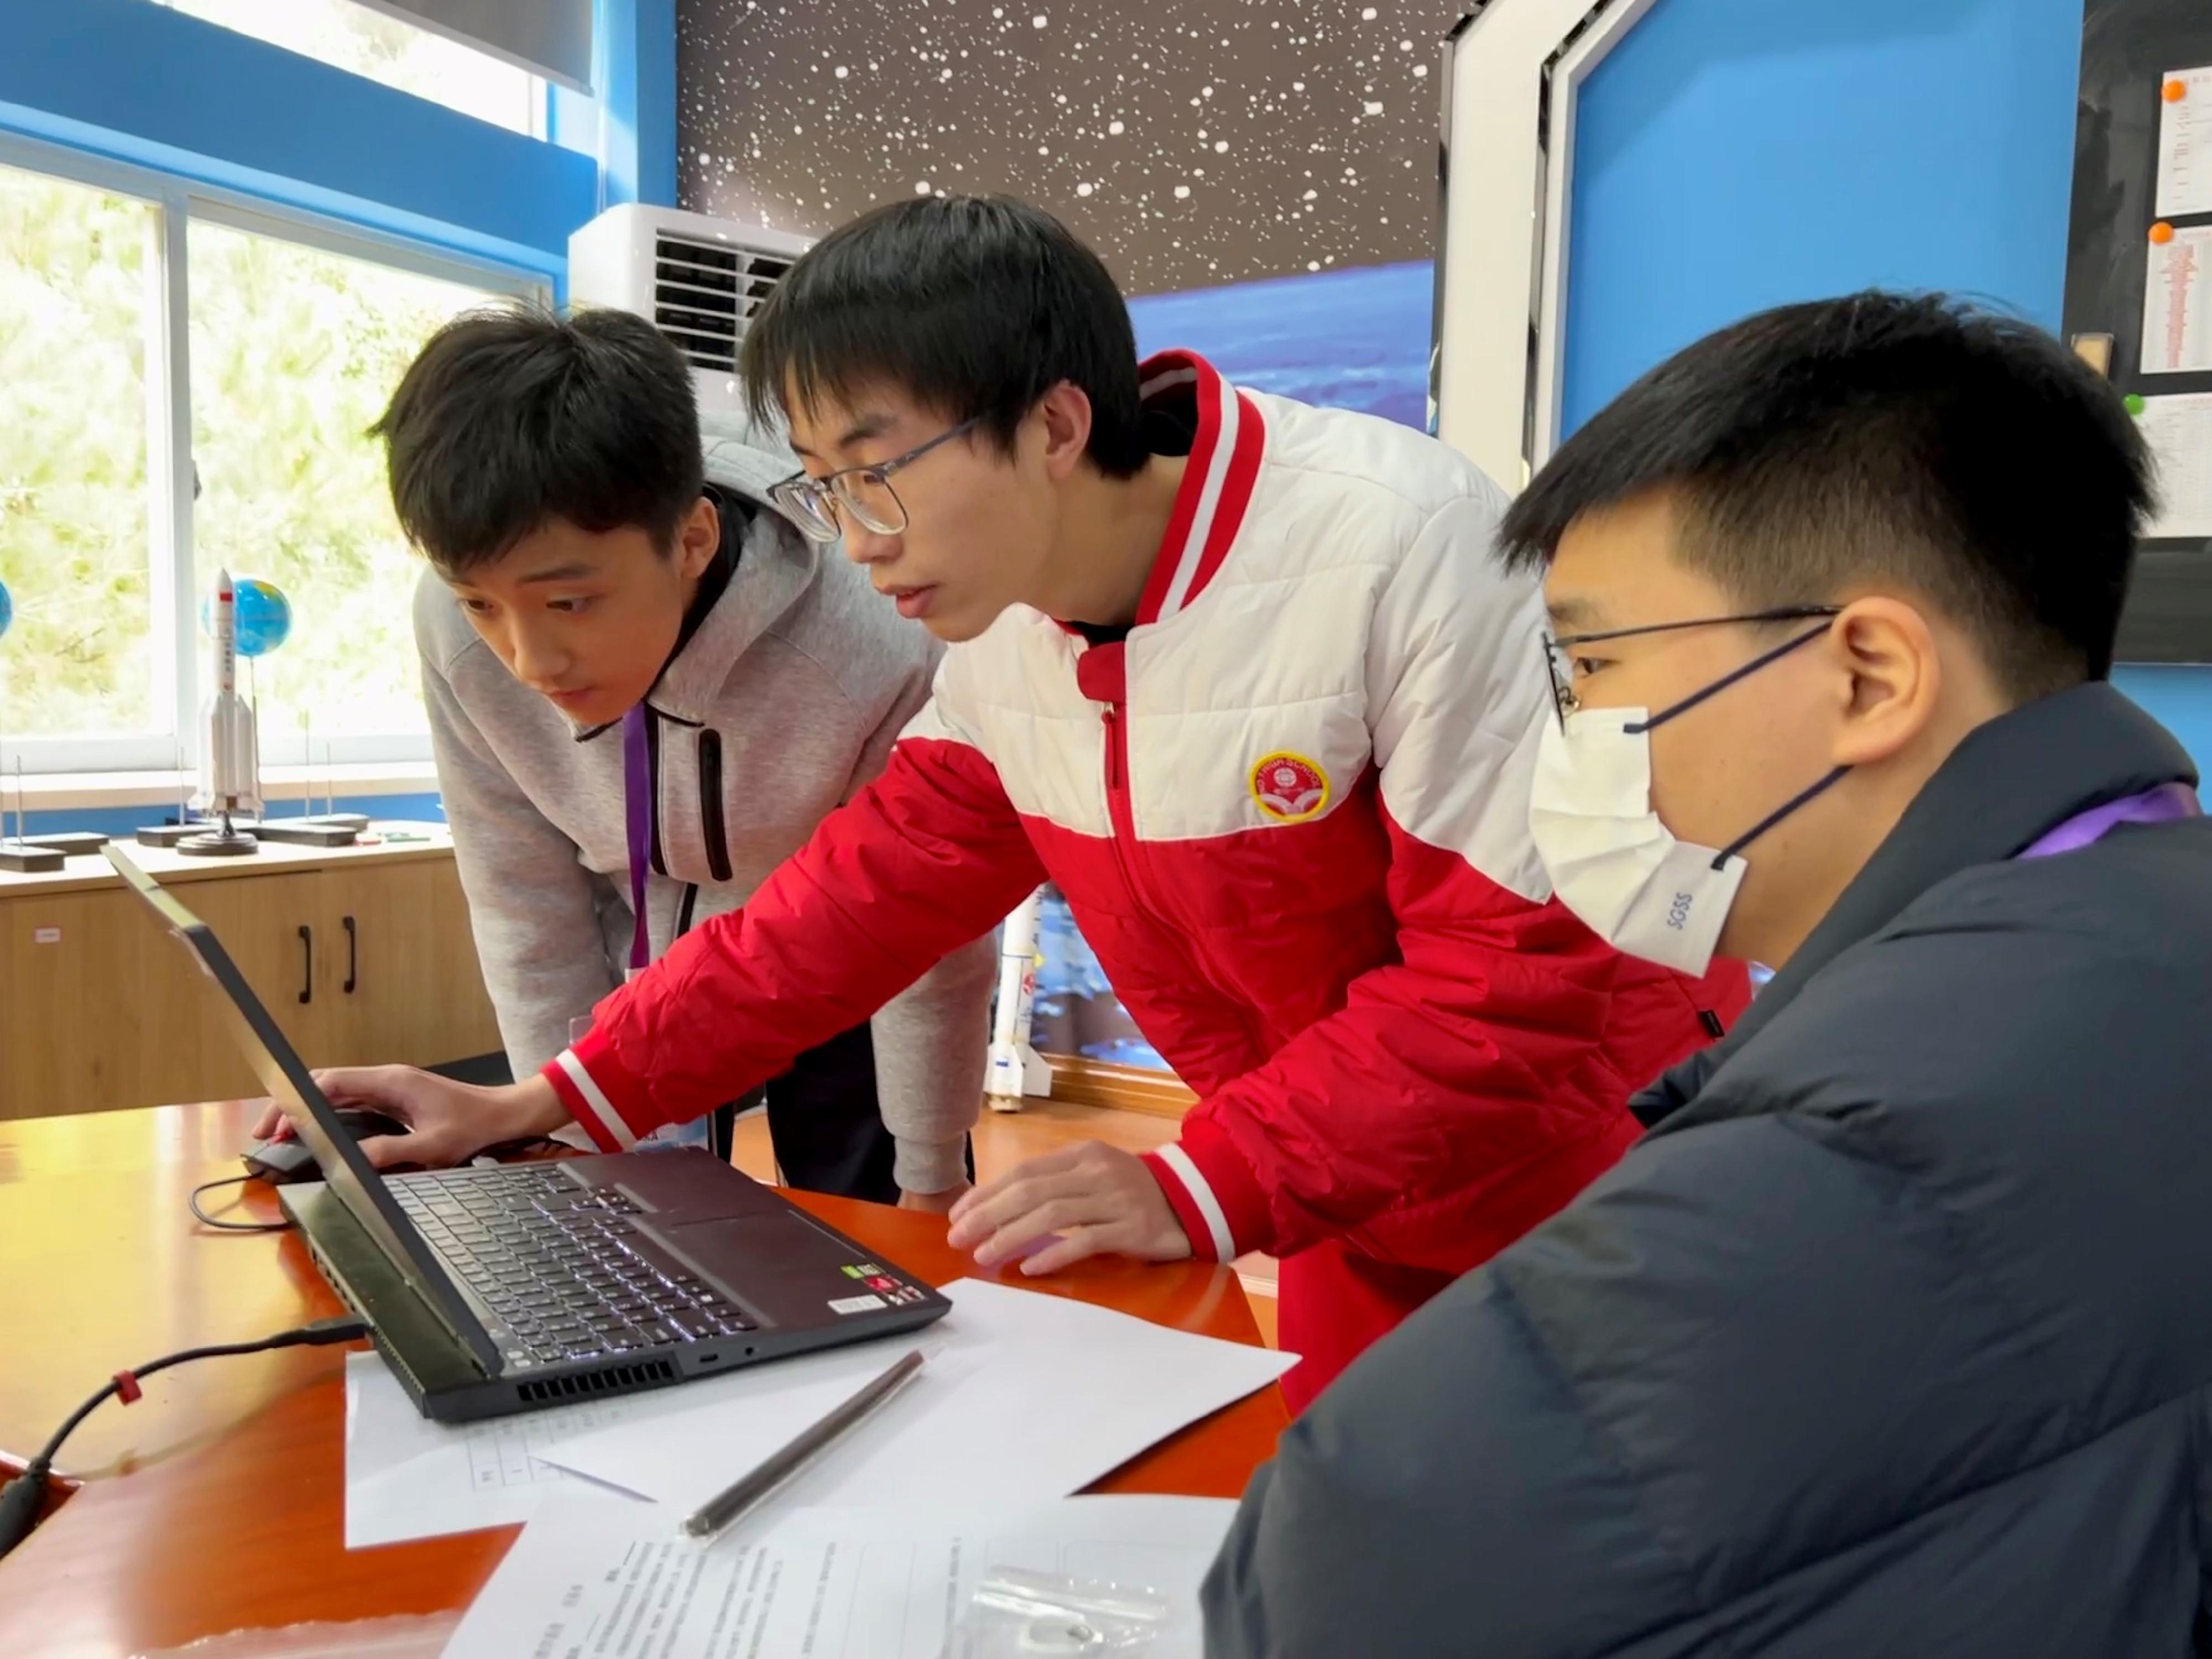 Students and teachers from Shau Kei Wan Government Secondary School joining the first Mainland study tour outside Guangdong Province of the senior secondary subject of Citizenship and Social Development visited Guiyang No.1 High School in Guizhou today (November 17). Photo shows students from the two schools participating in a space-themed learning activity.